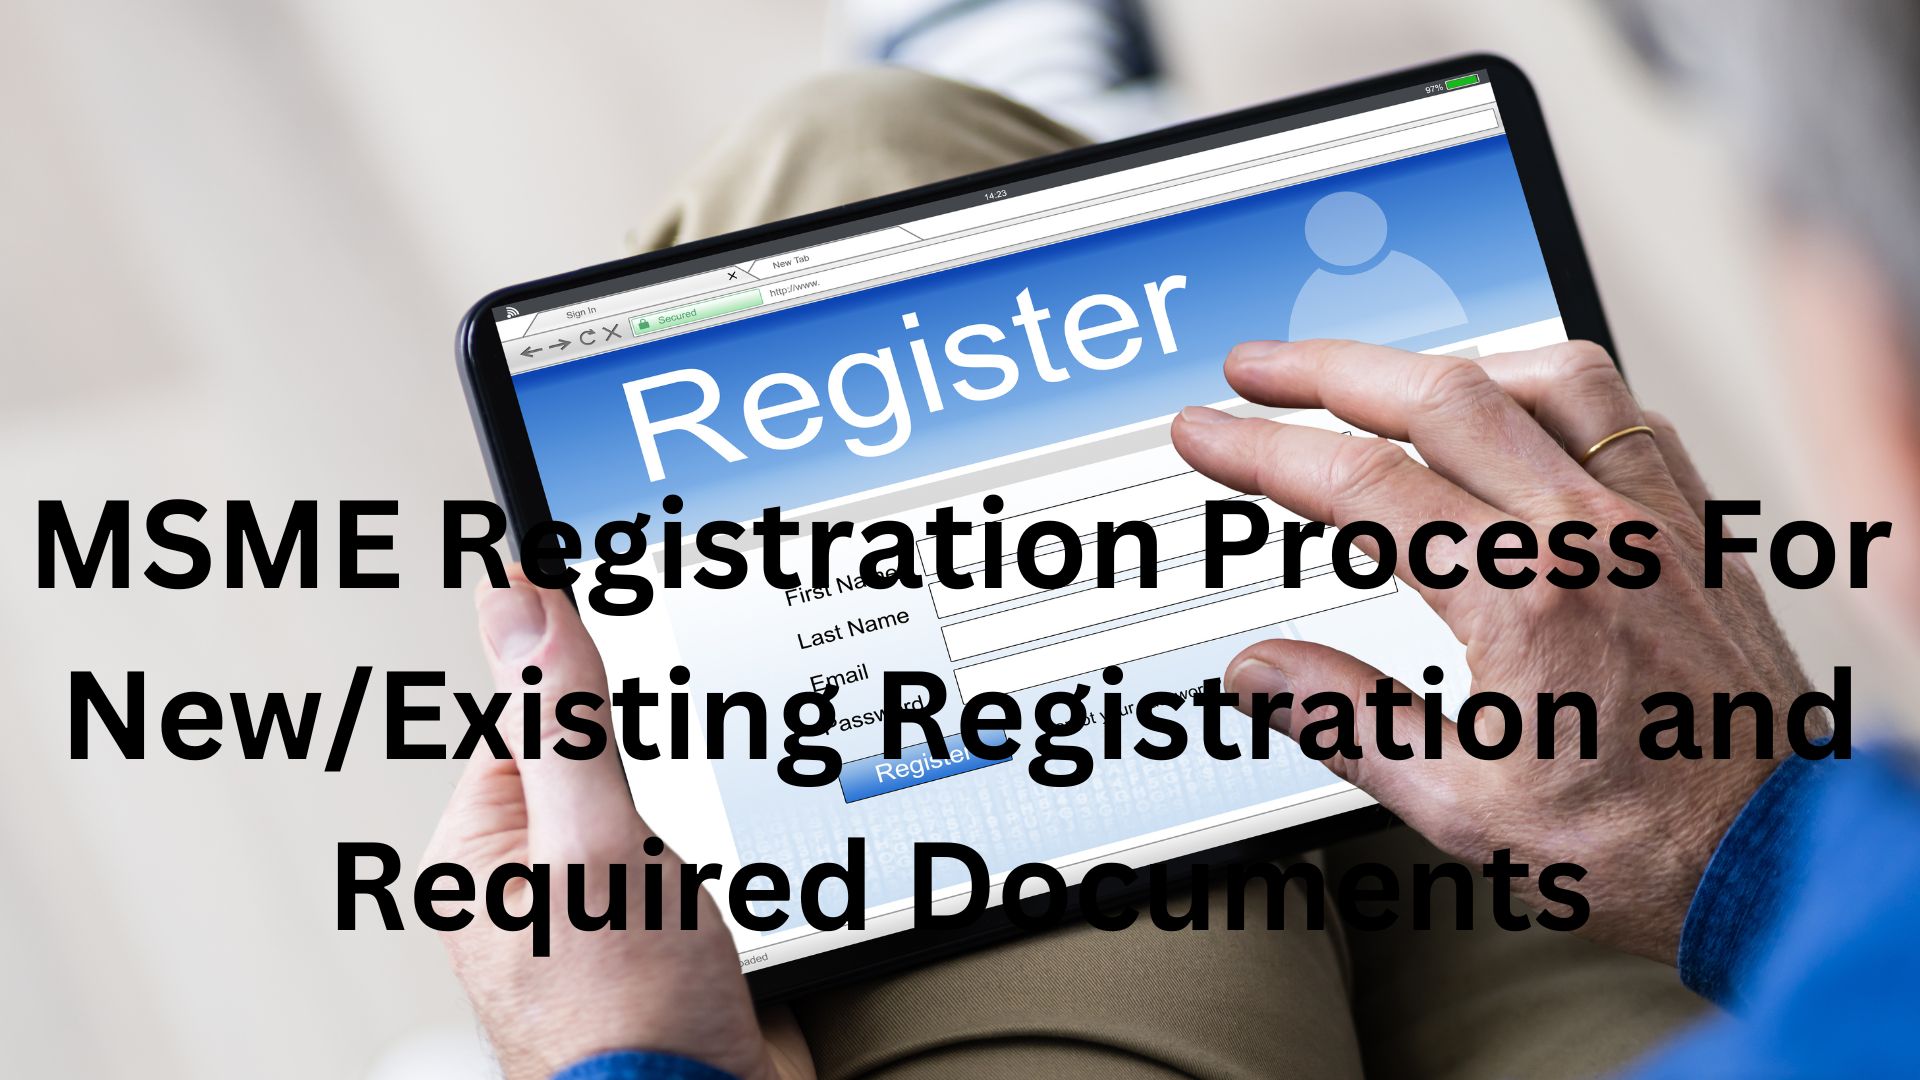 MSME Registration Process For New/Existing Registration and Required Documents